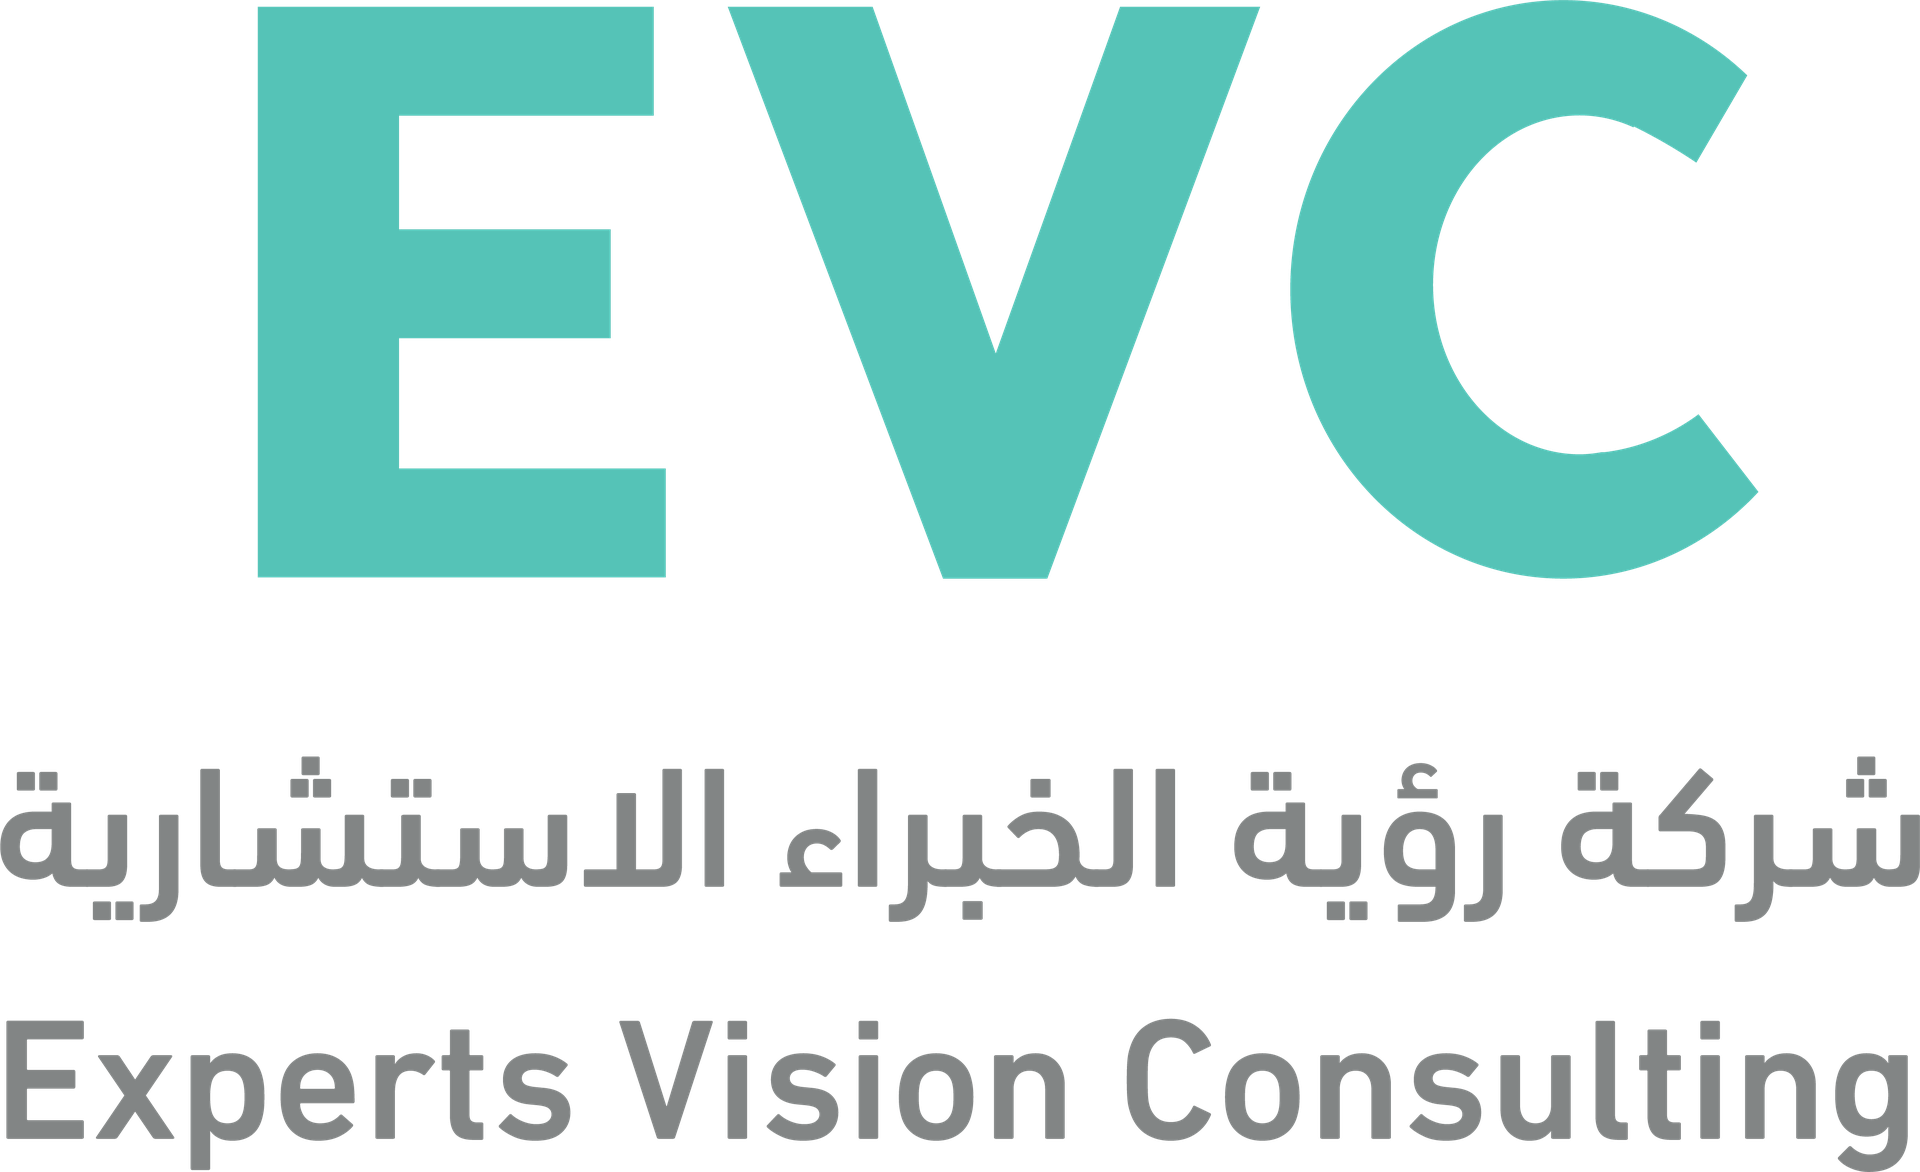 EVC- Experts Vision Consulting